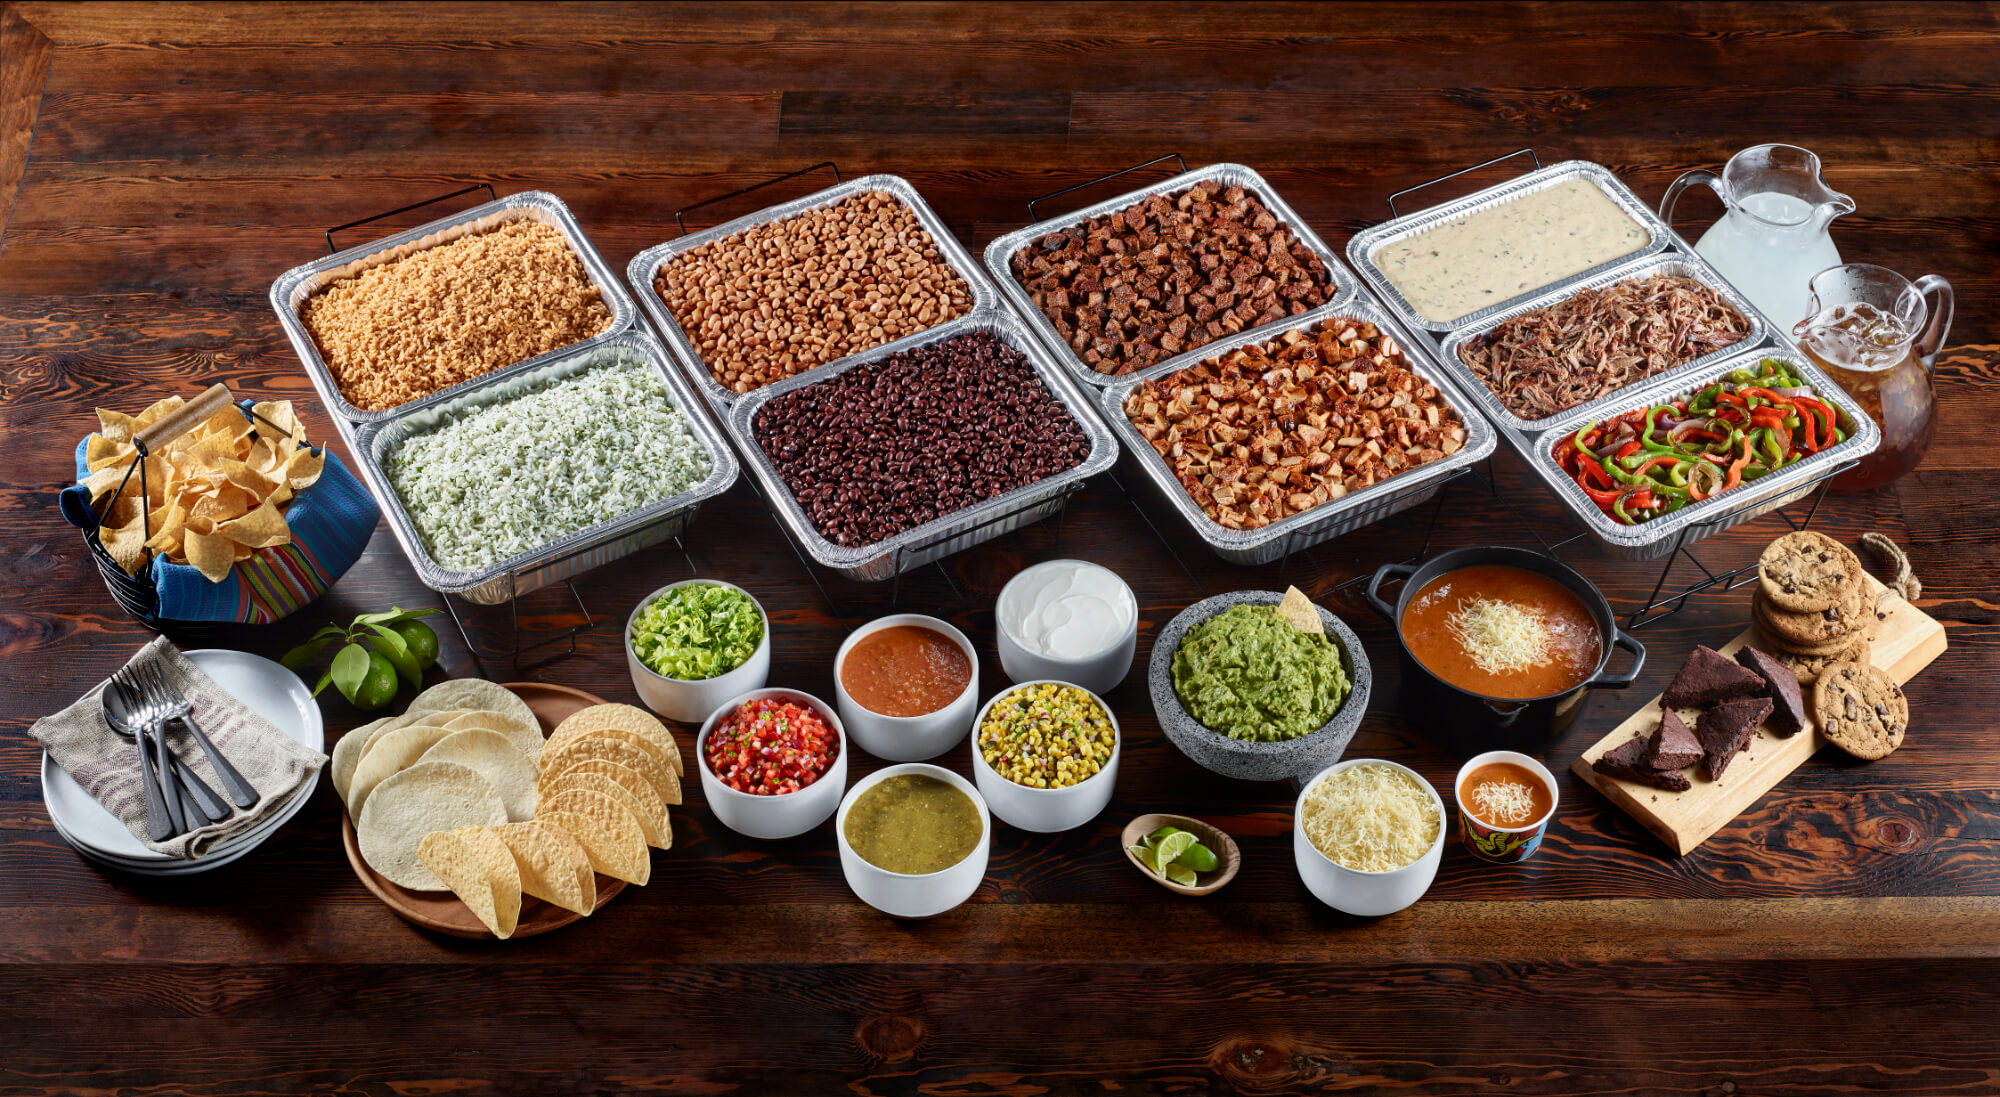 Buffet Style Hot Bar from QDOBA Catering